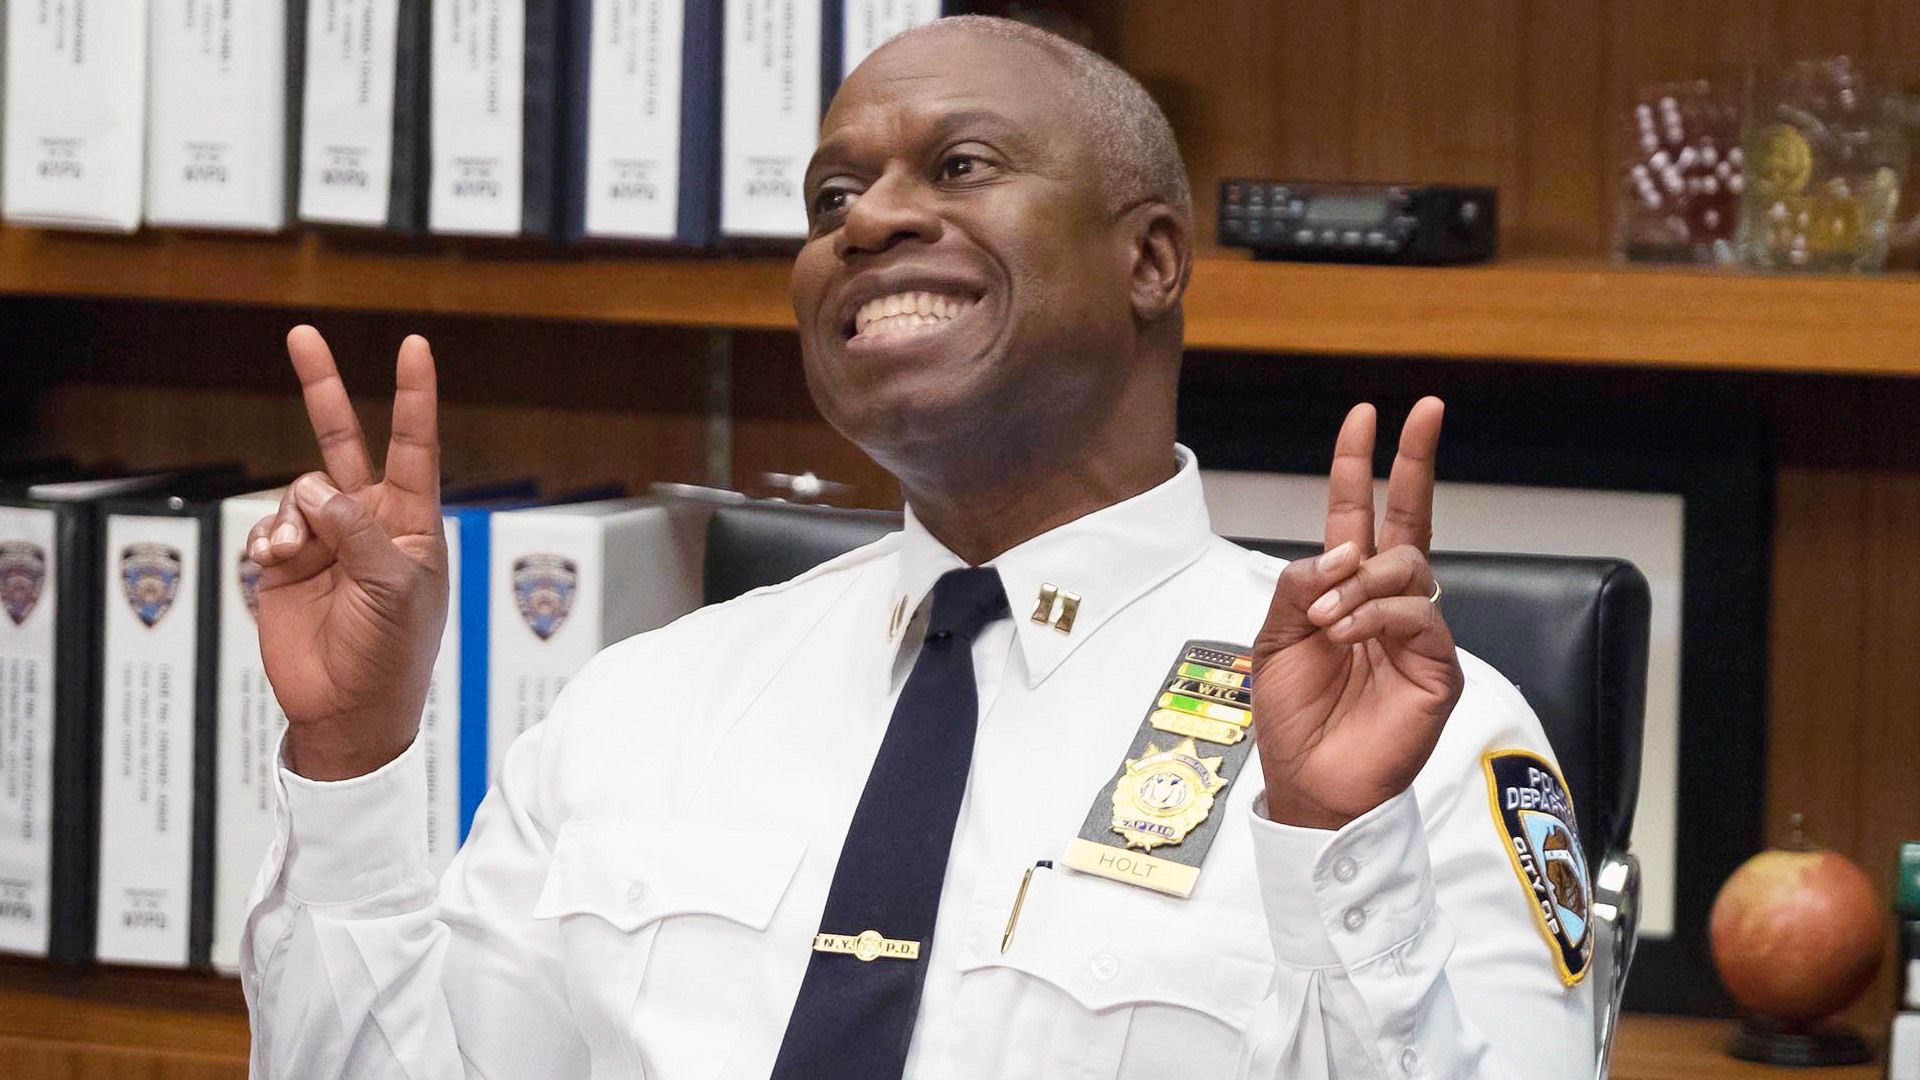 Captain Holt smiling and peacing out